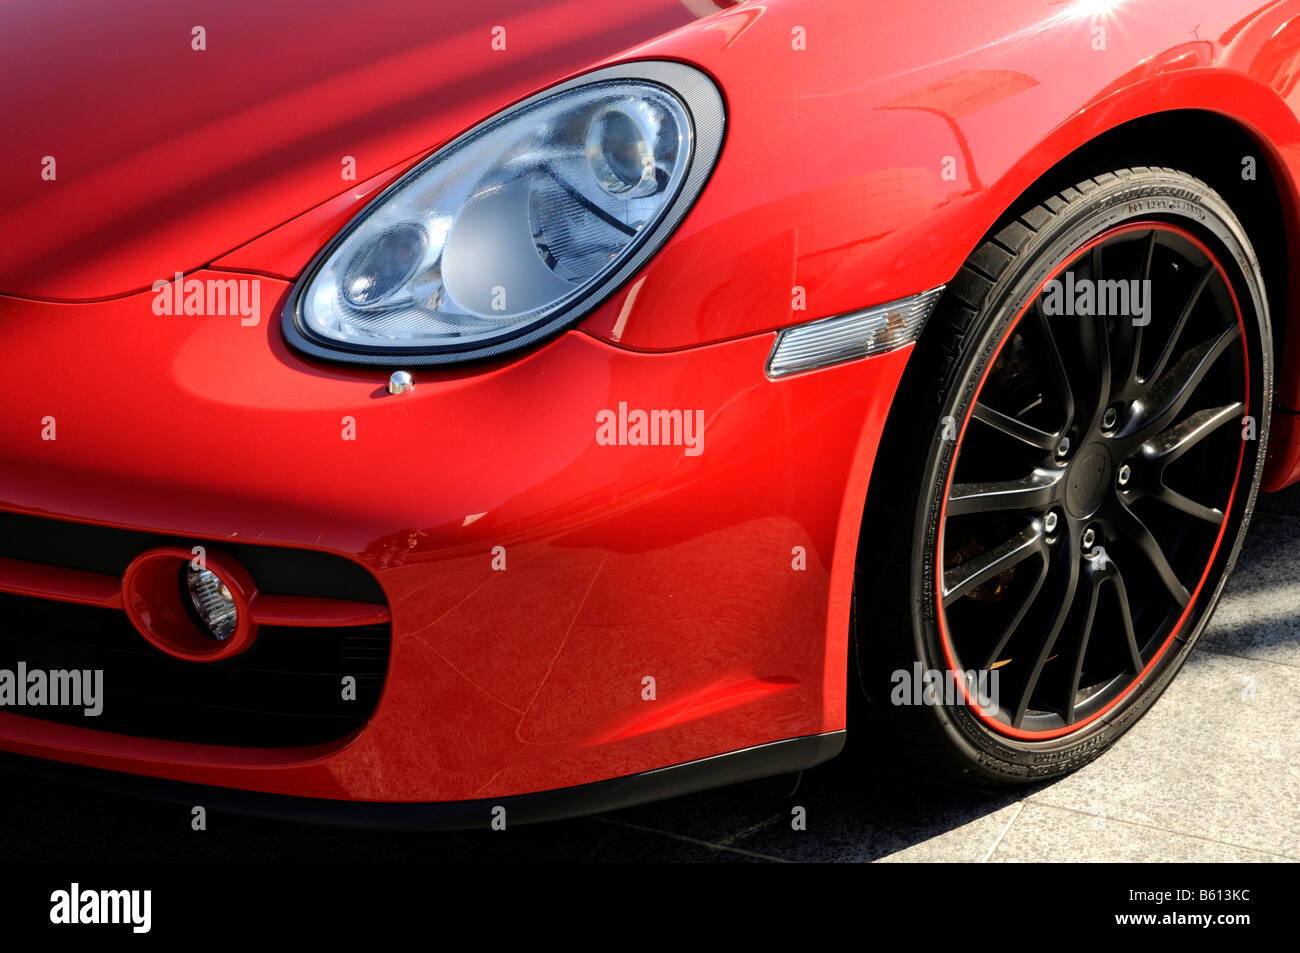 Front left view of the Porsche 911, on the occasion of new presentation of the Porsche 911, Porsche Centre Swabian Gmuend Stock Photo